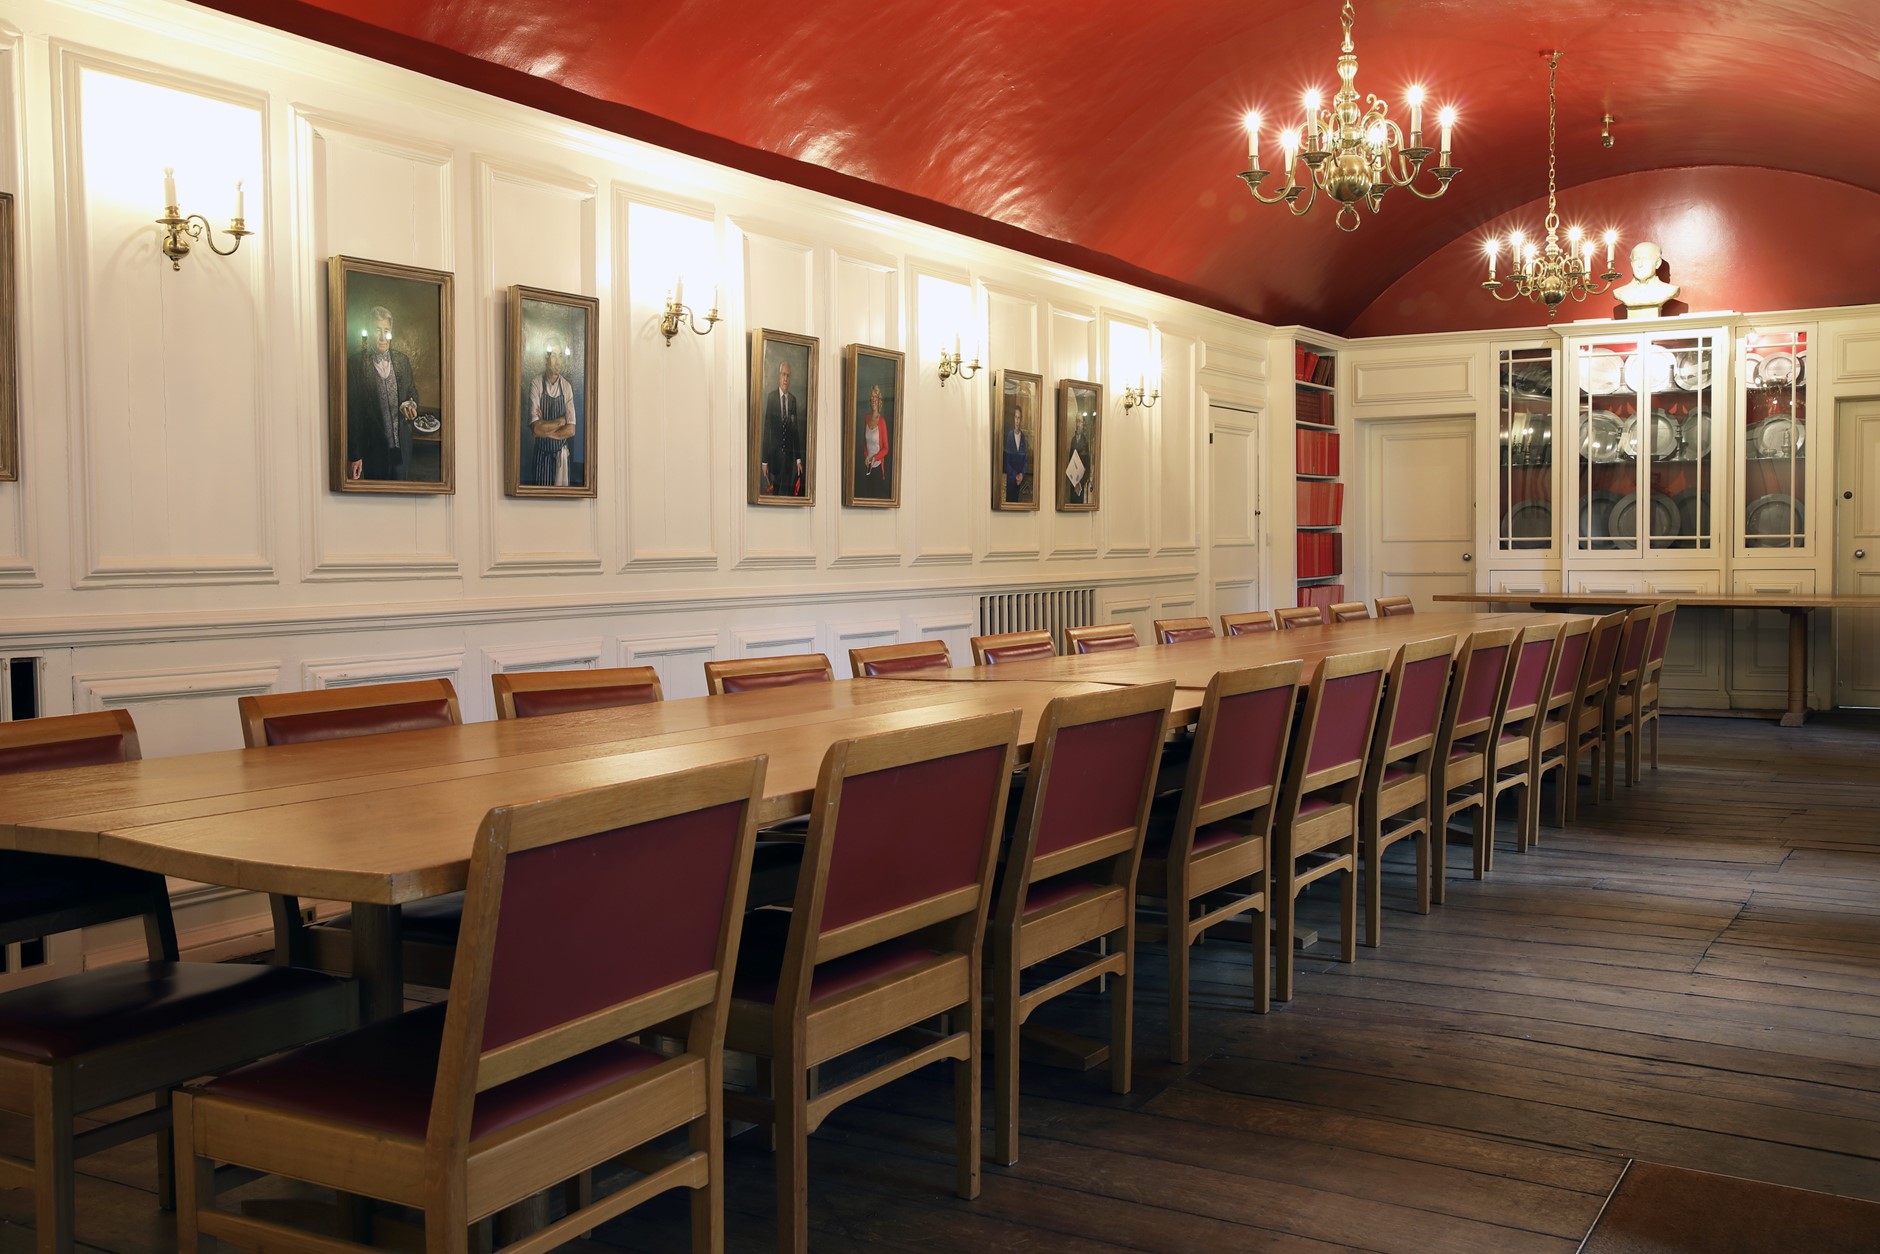 The South Undercroft - a room with a red ceiling with a long brown meeting table. Portraits hang on the walls.